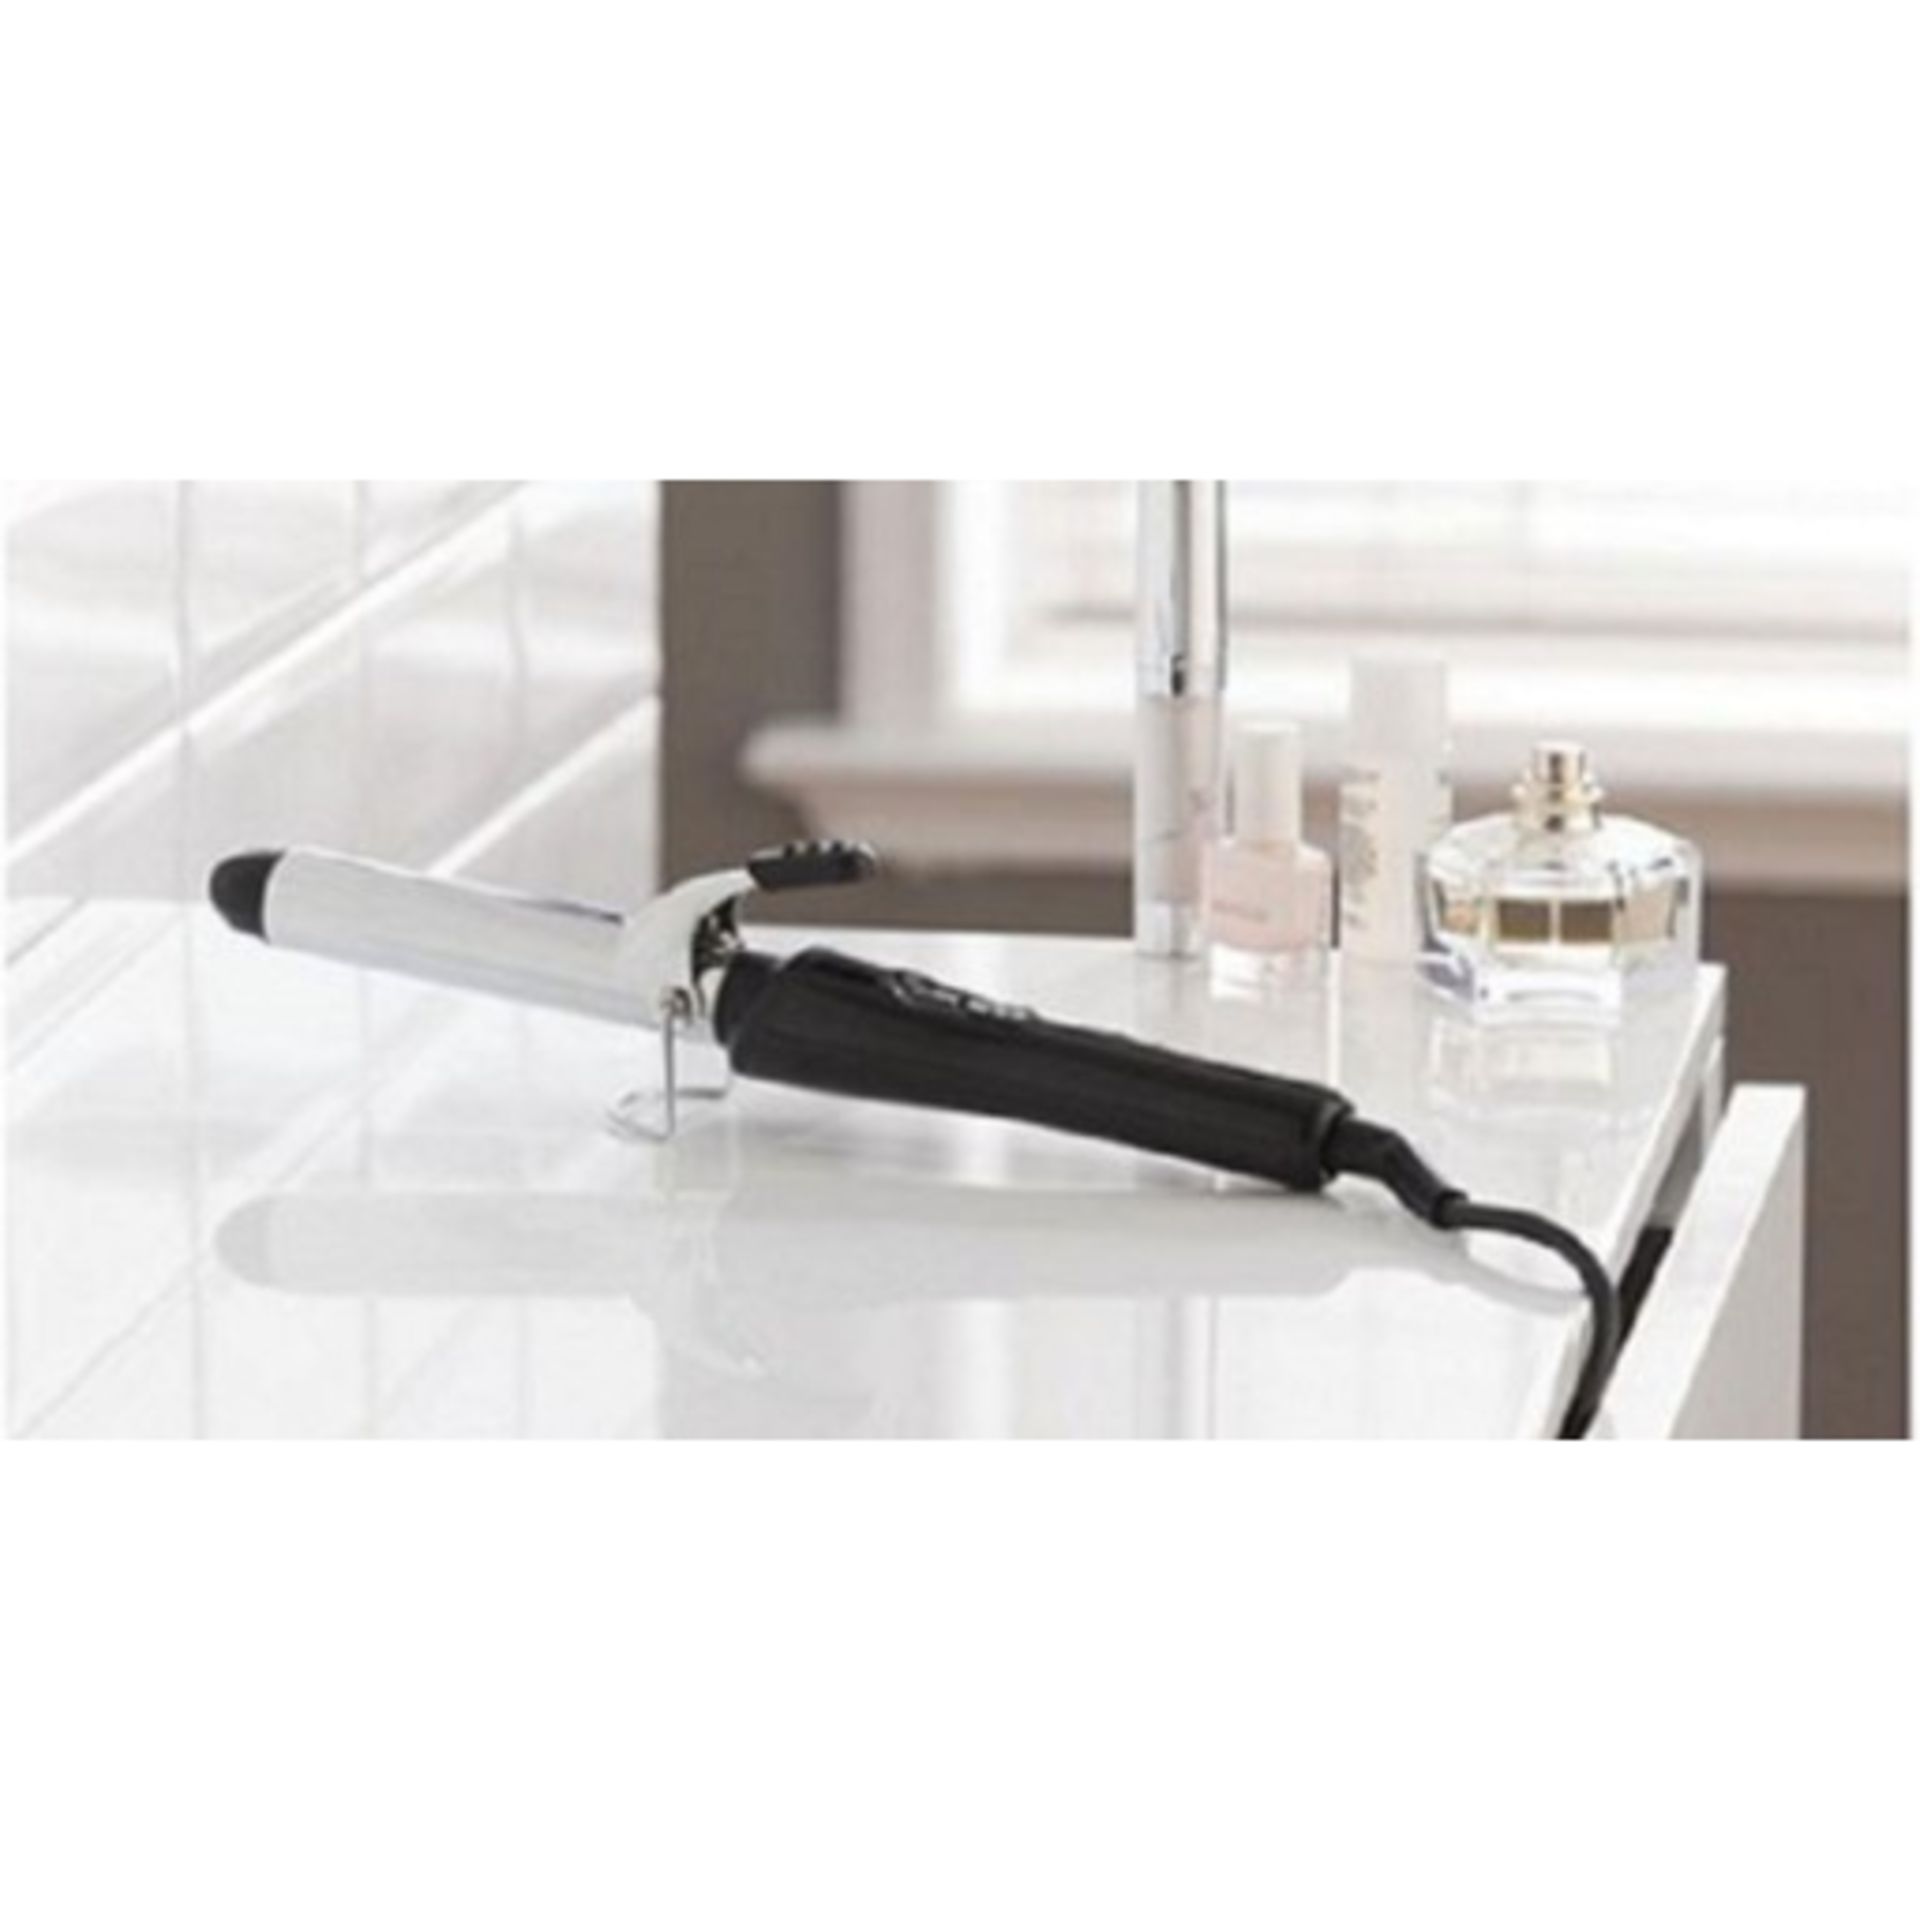 V Brand New 25mm Curling Tongs with 2 meter Swivel Cord - Heats Up to 200 Degrees Celcius with